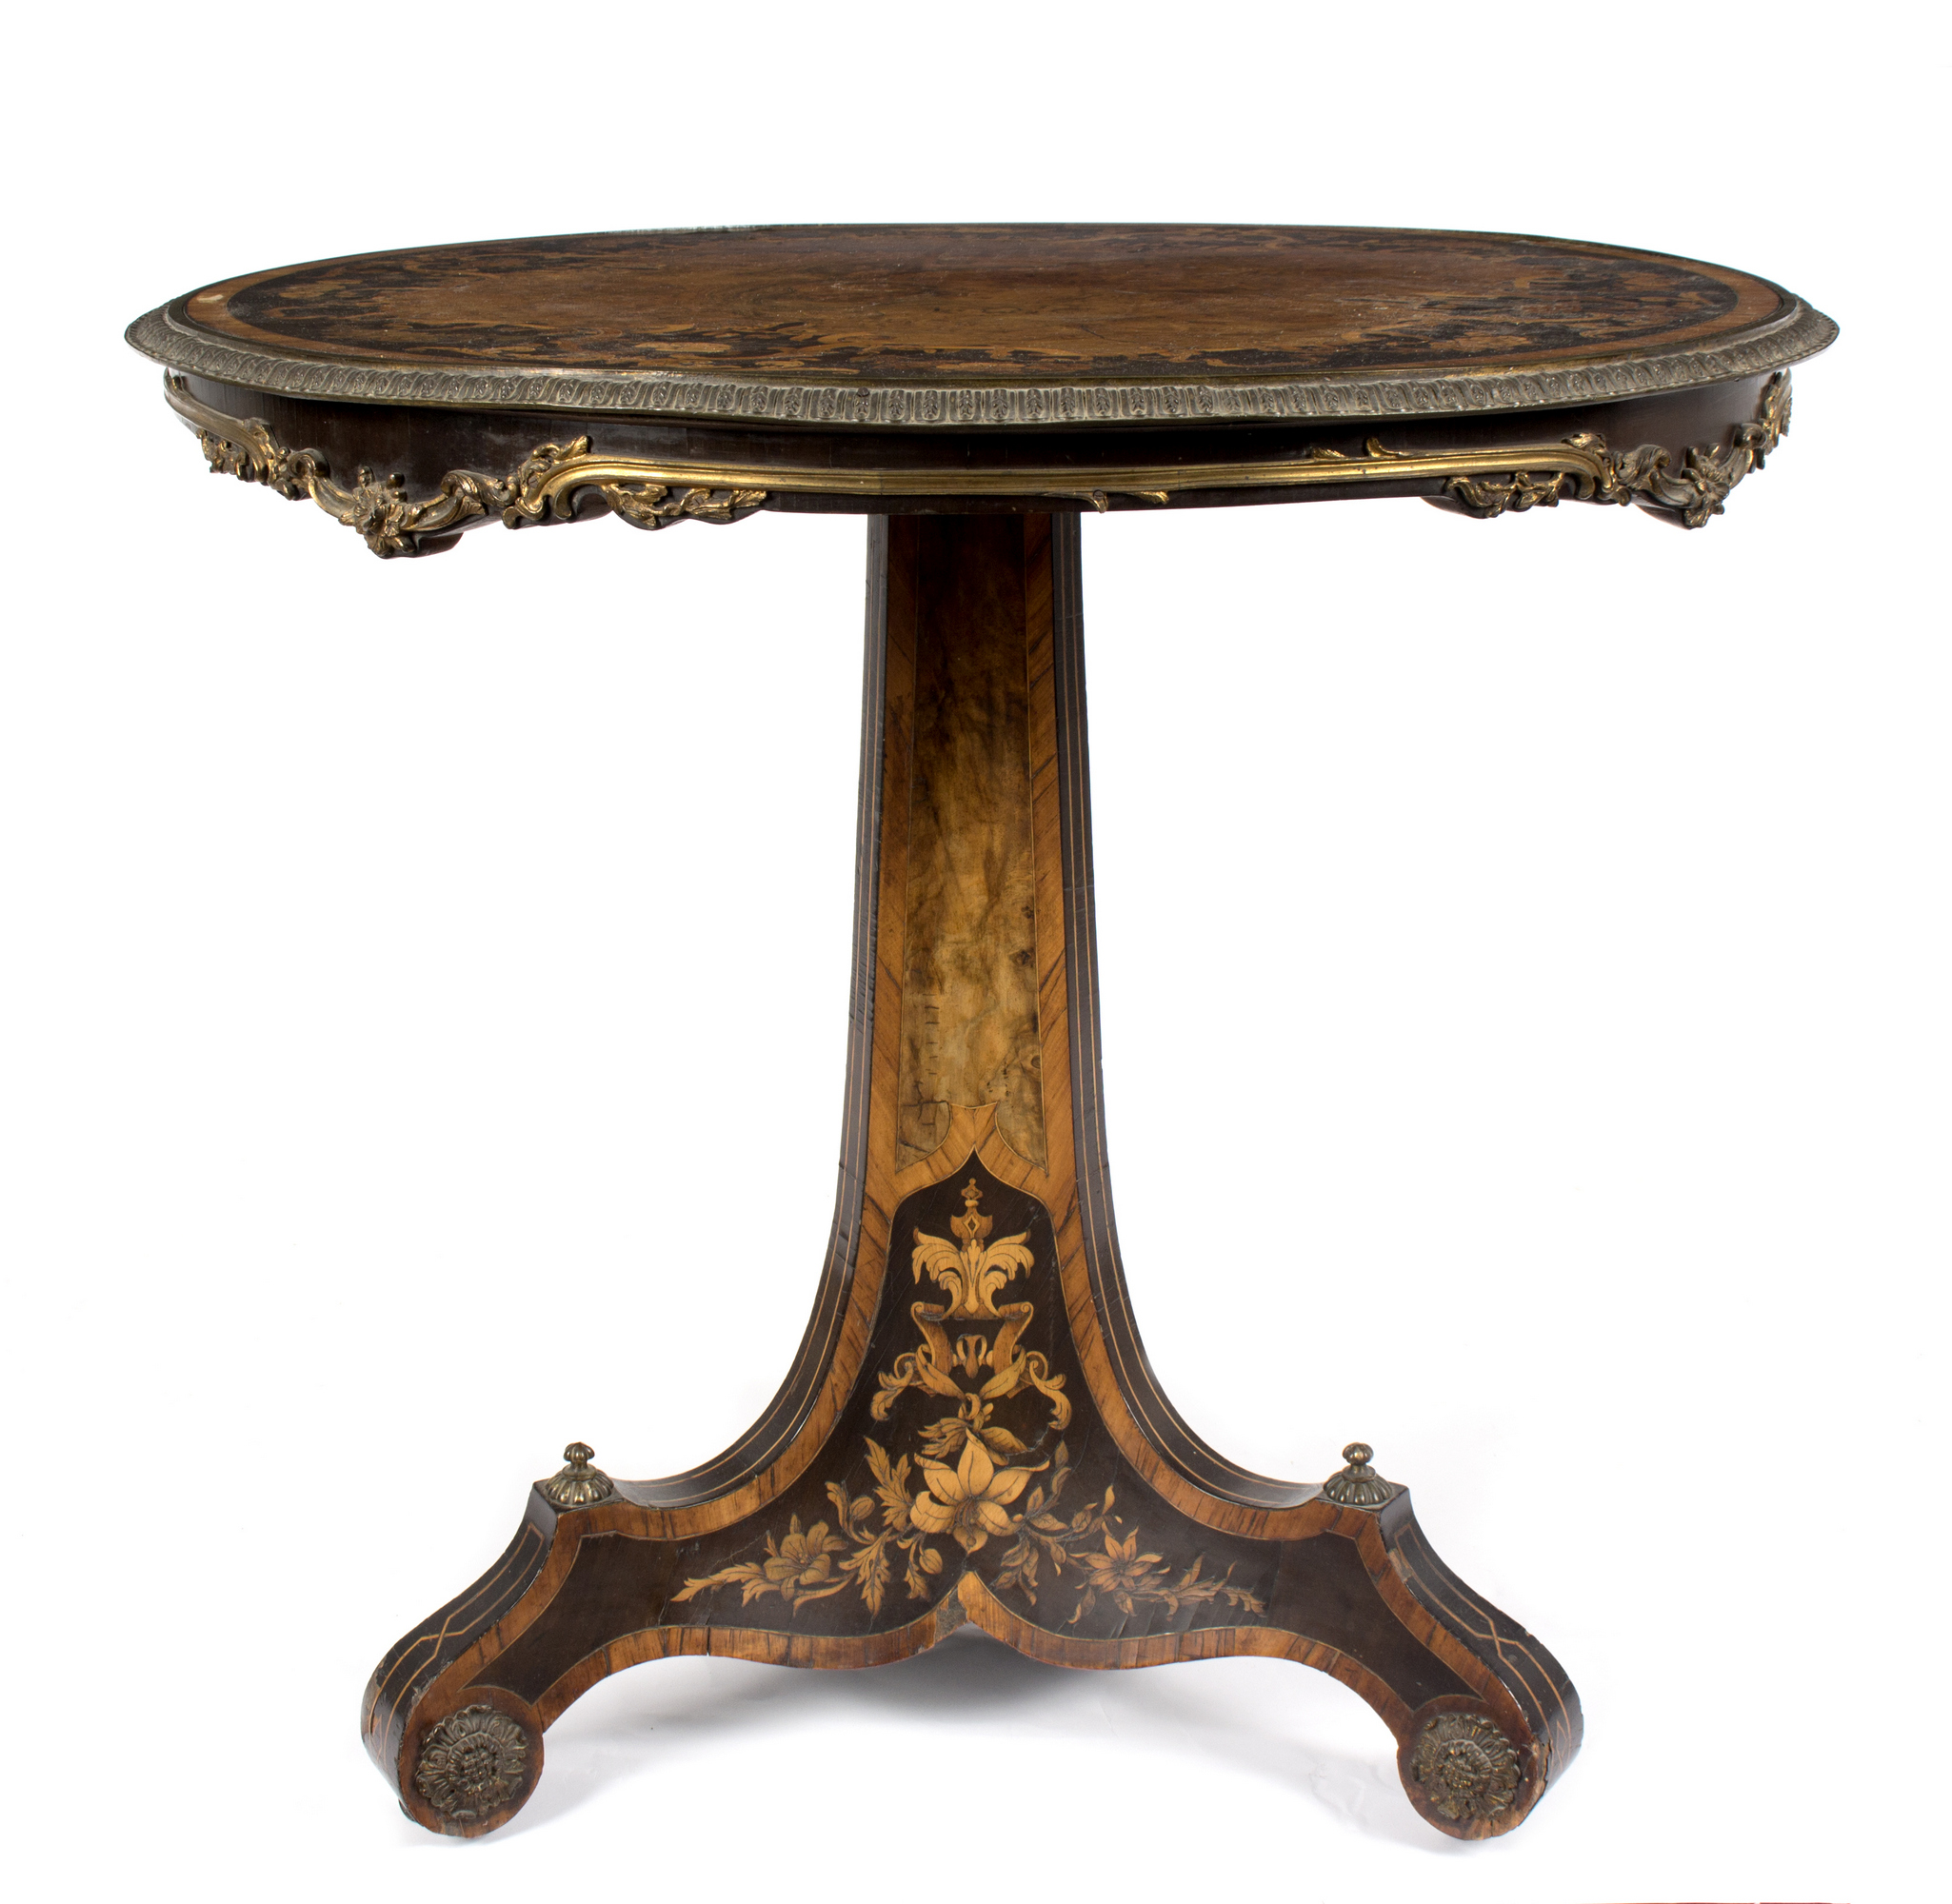 A Victorian burr walnut and marquetry circular table, in the manner of Robert Blake,